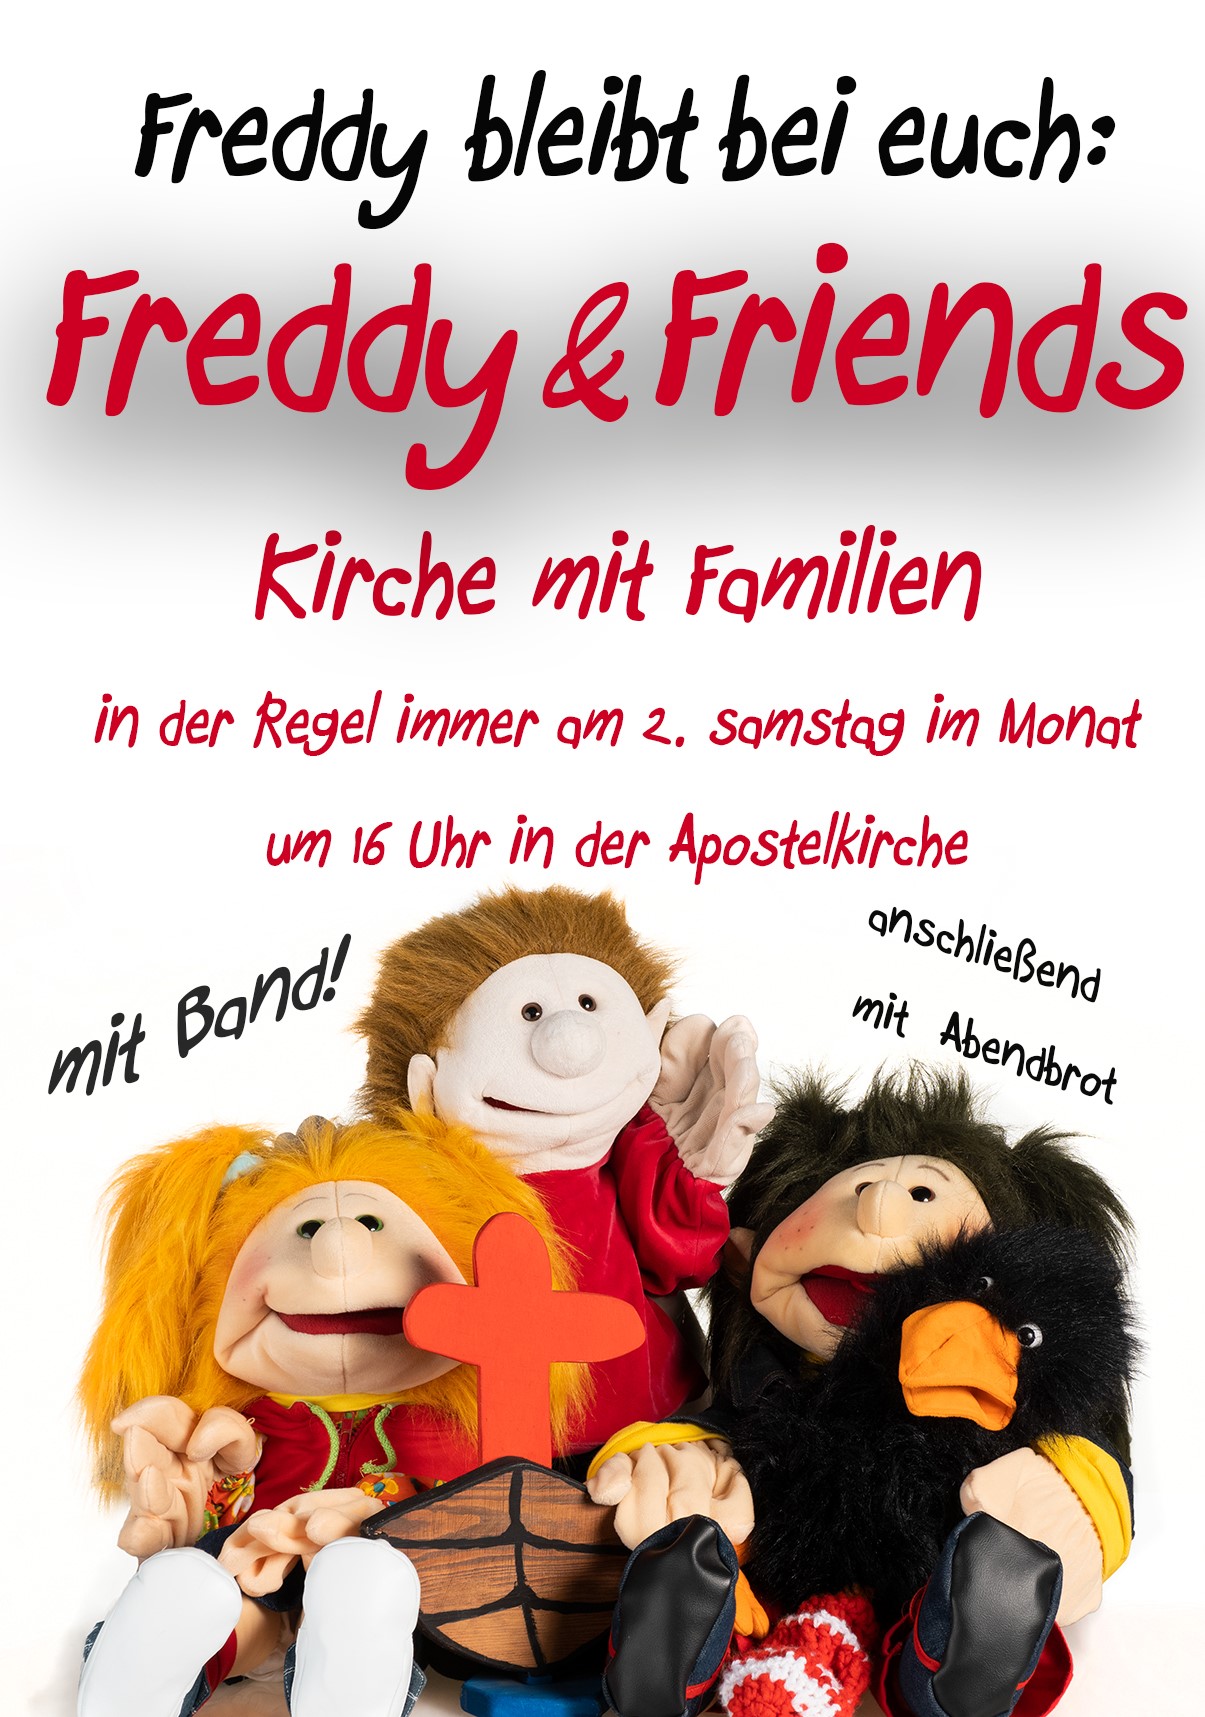 You are currently viewing Freddy bleibt bei euch….